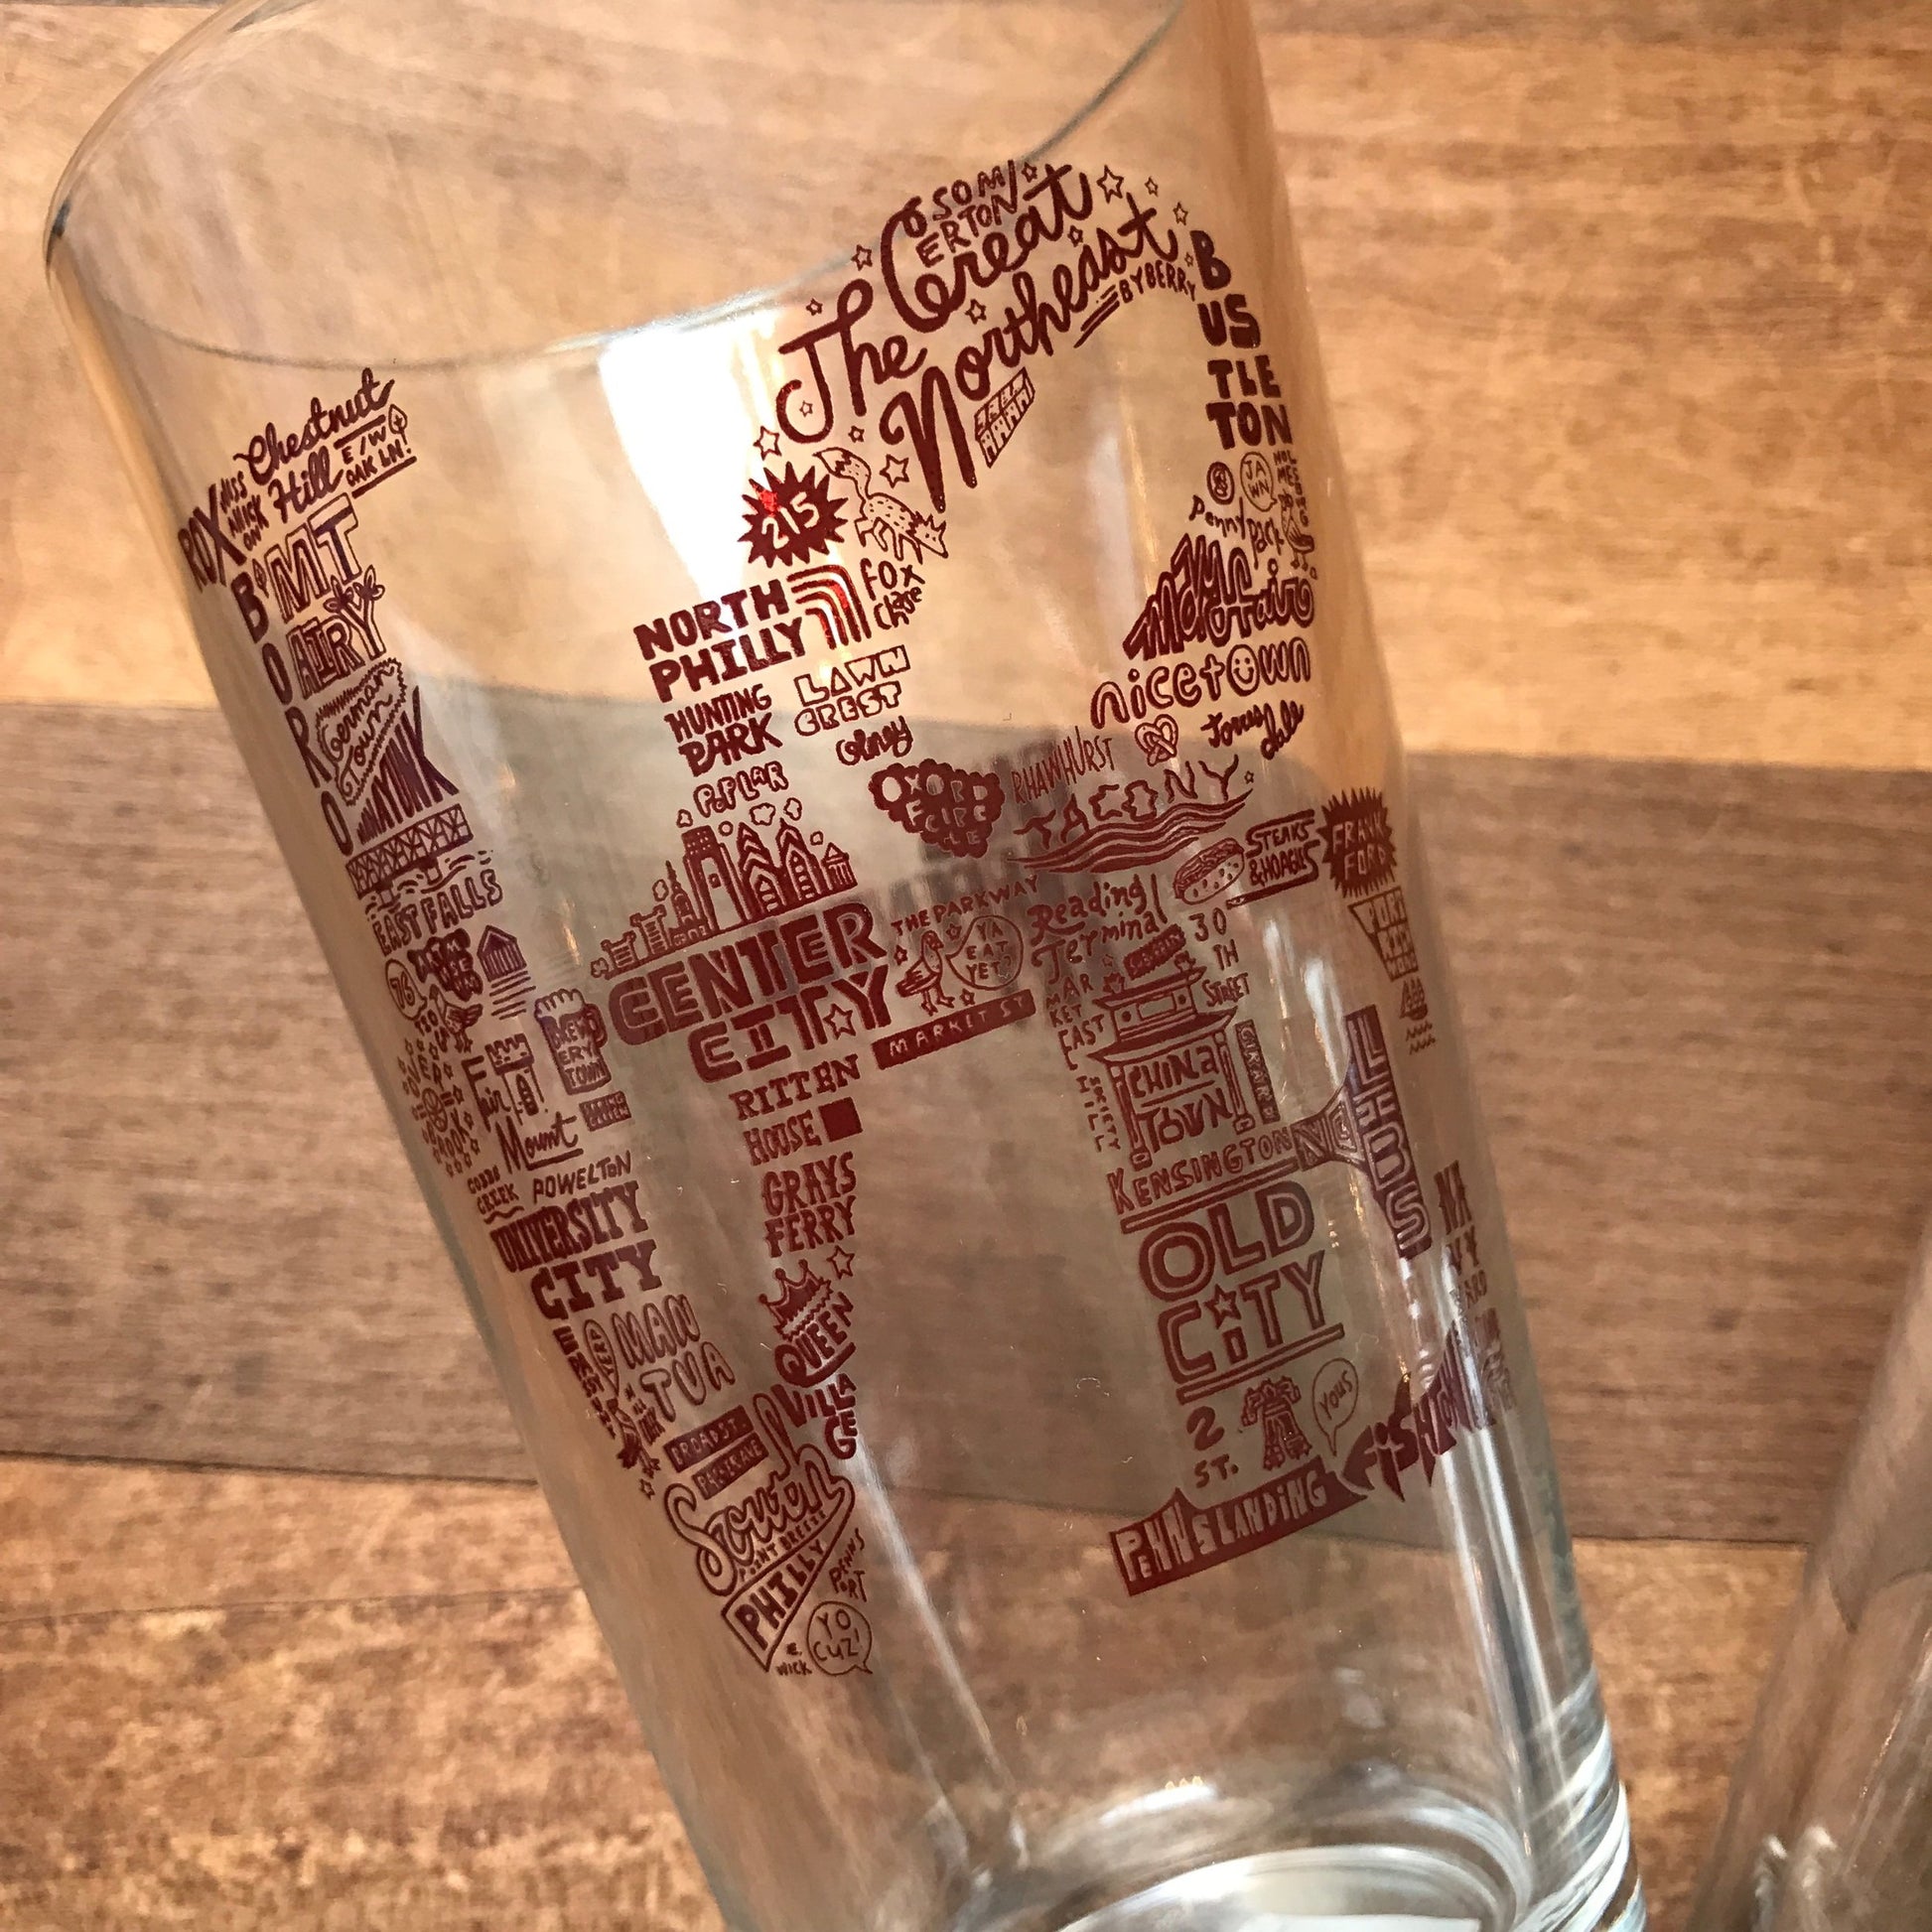 Clear Philly Pint Glasses with red text featuring various Philadelphia-themed neighborhood names and skyline landmarks by Paul Carpenter.